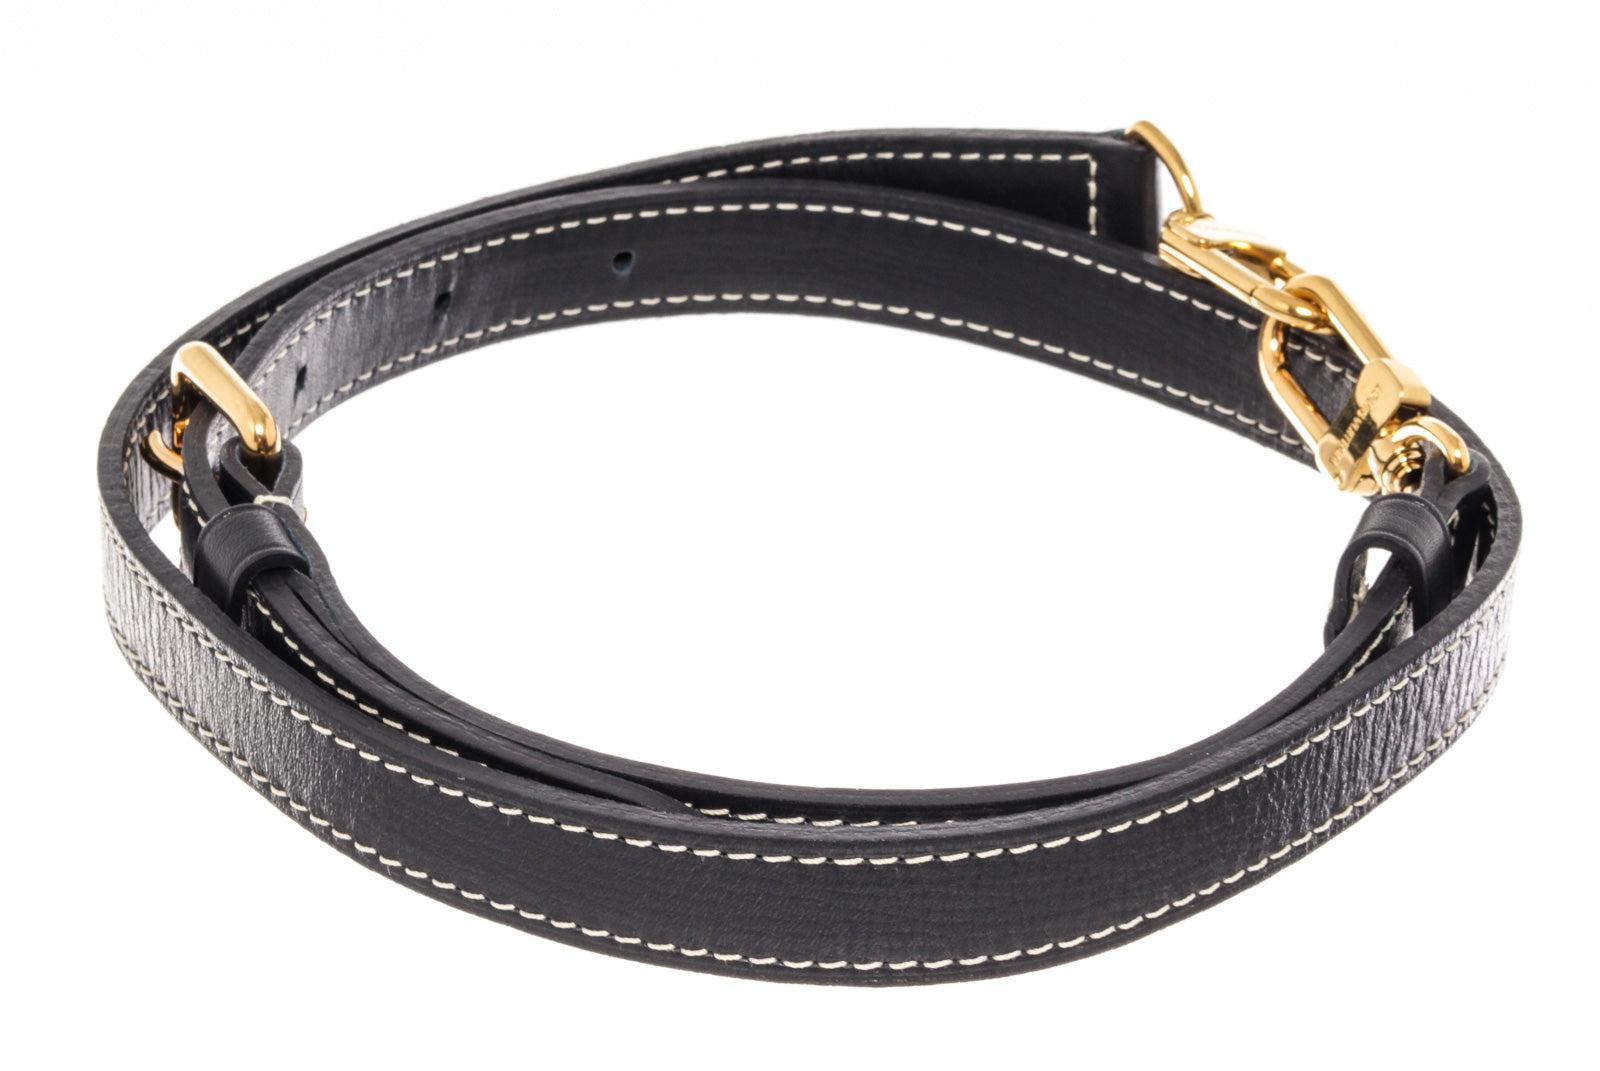 Black Louis Vuitton Navy Leather Extender Strap with leather, tan vachetta leather